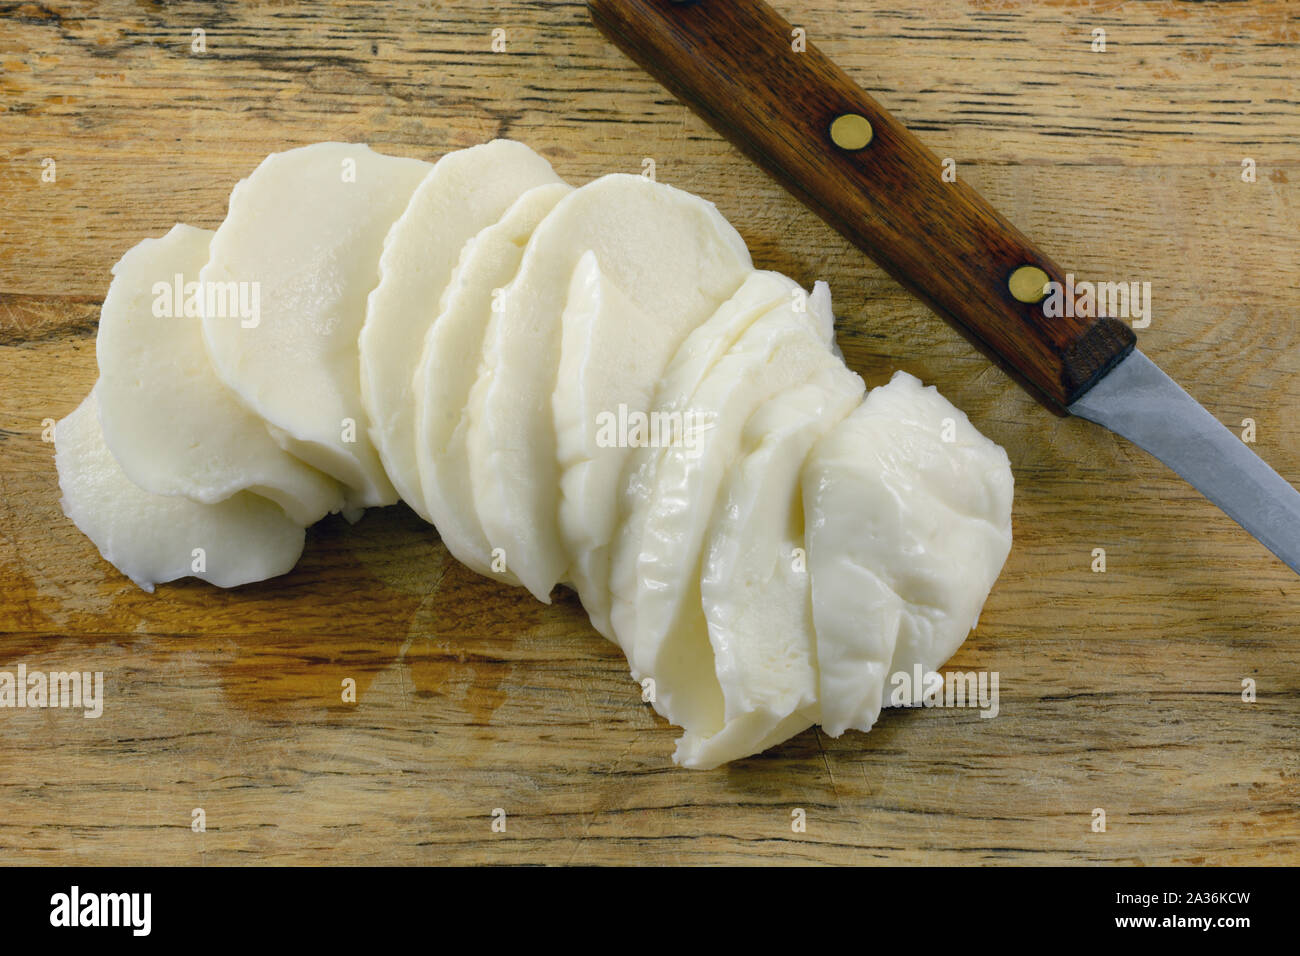 Fresh mozzarella cheese slices on wooden cutting board with kitchen knife Stock Photo